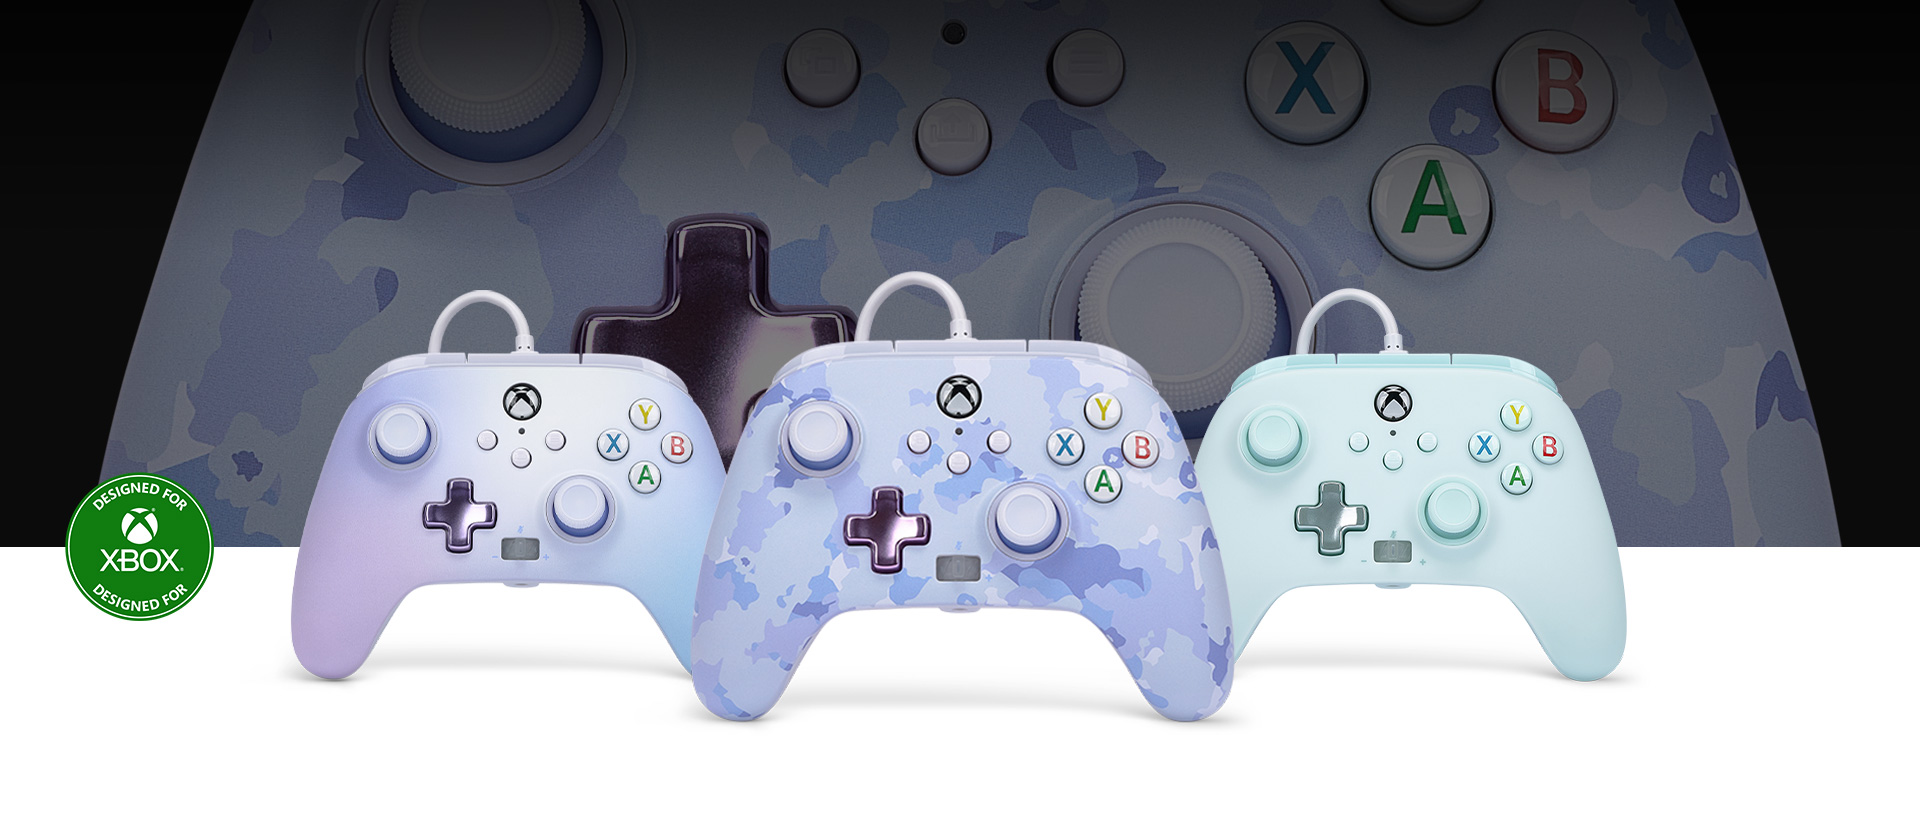 Designed for Xbox logo, Purple Camo controller in front with the Pastel Dream and Cotton Candy Blue controllers beside it